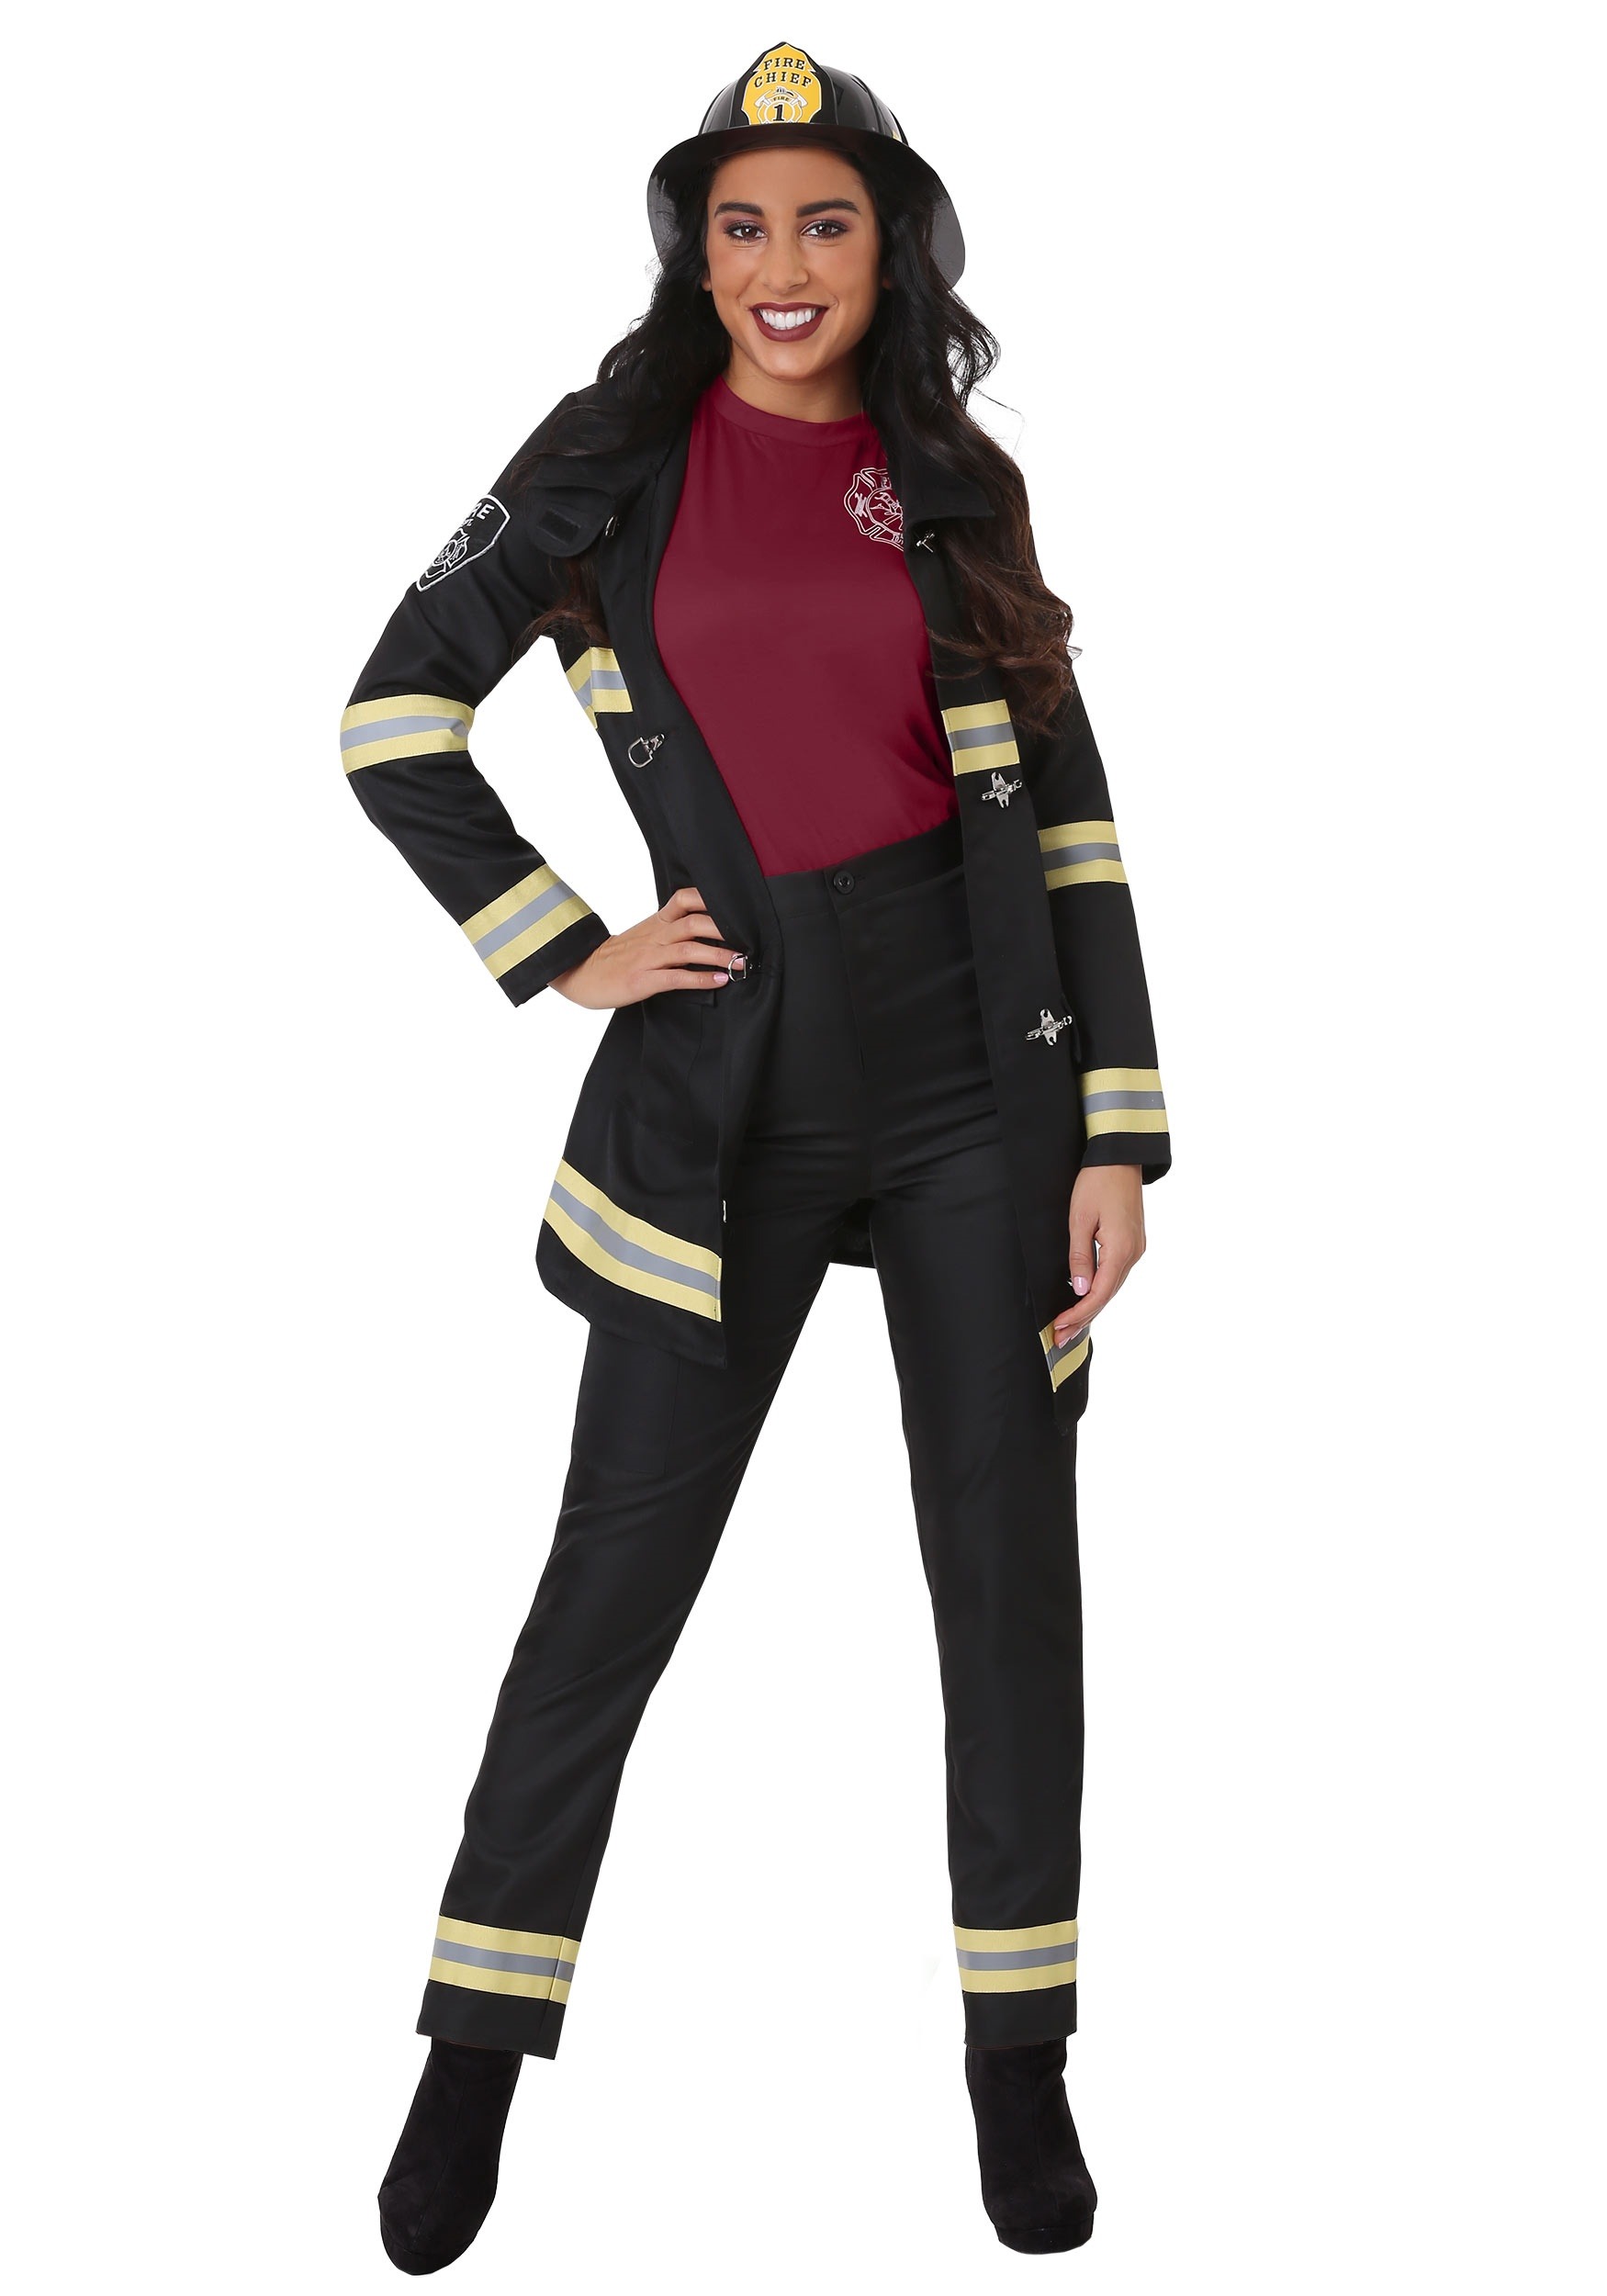 Photos - Fancy Dress FUN Costumes Reflective Firefighter Costume for Women Black/Yellow/